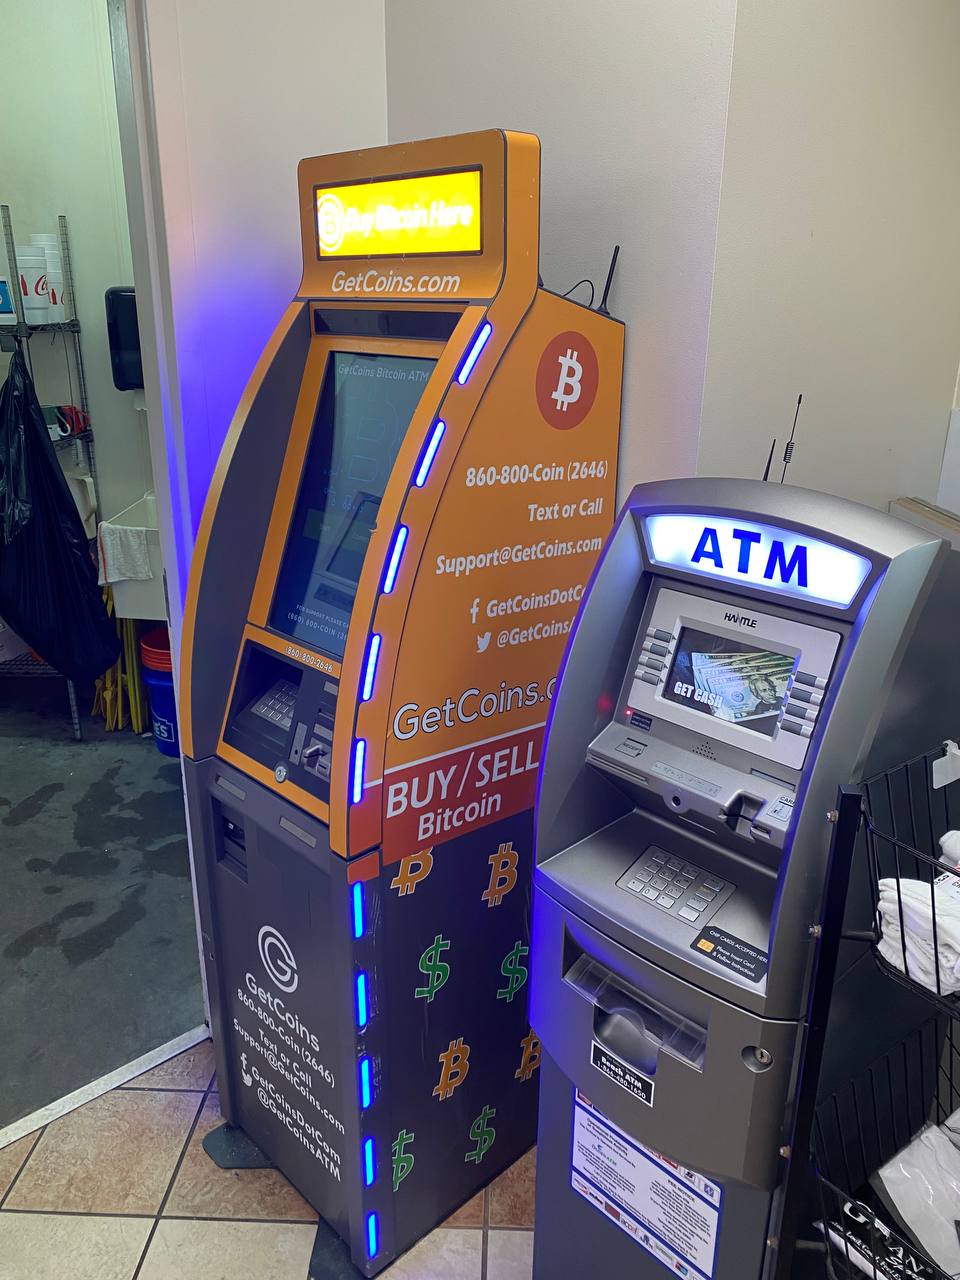 Getcoins - Bitcoin ATM - Inside of BP in Fayetteville, North Carolina